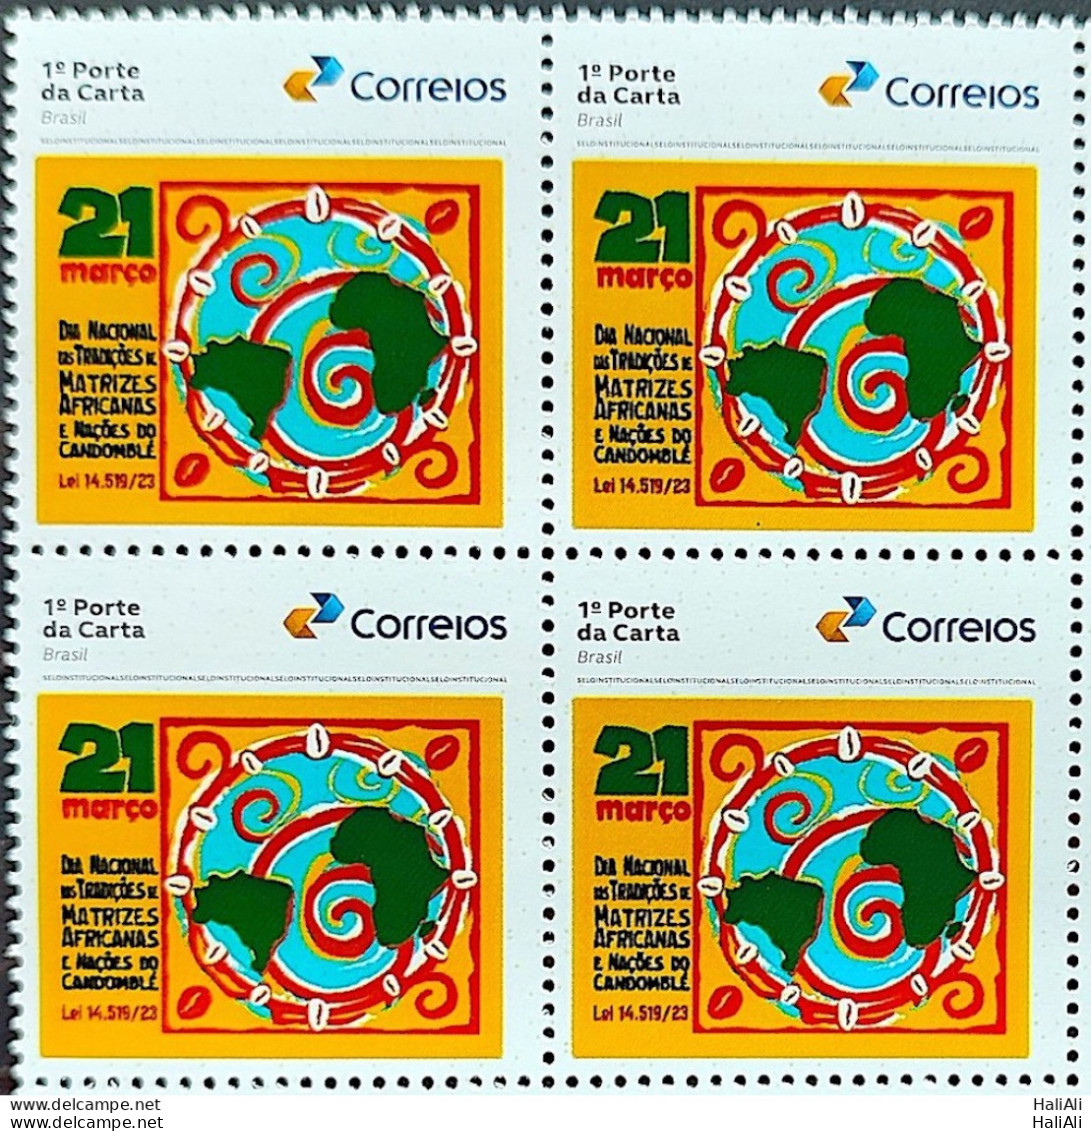 SI 06 Brazil Institutional Stamp Traditions Of African Matrices And Candomble Nations Map 2023 Block Of 4 - Personalized Stamps